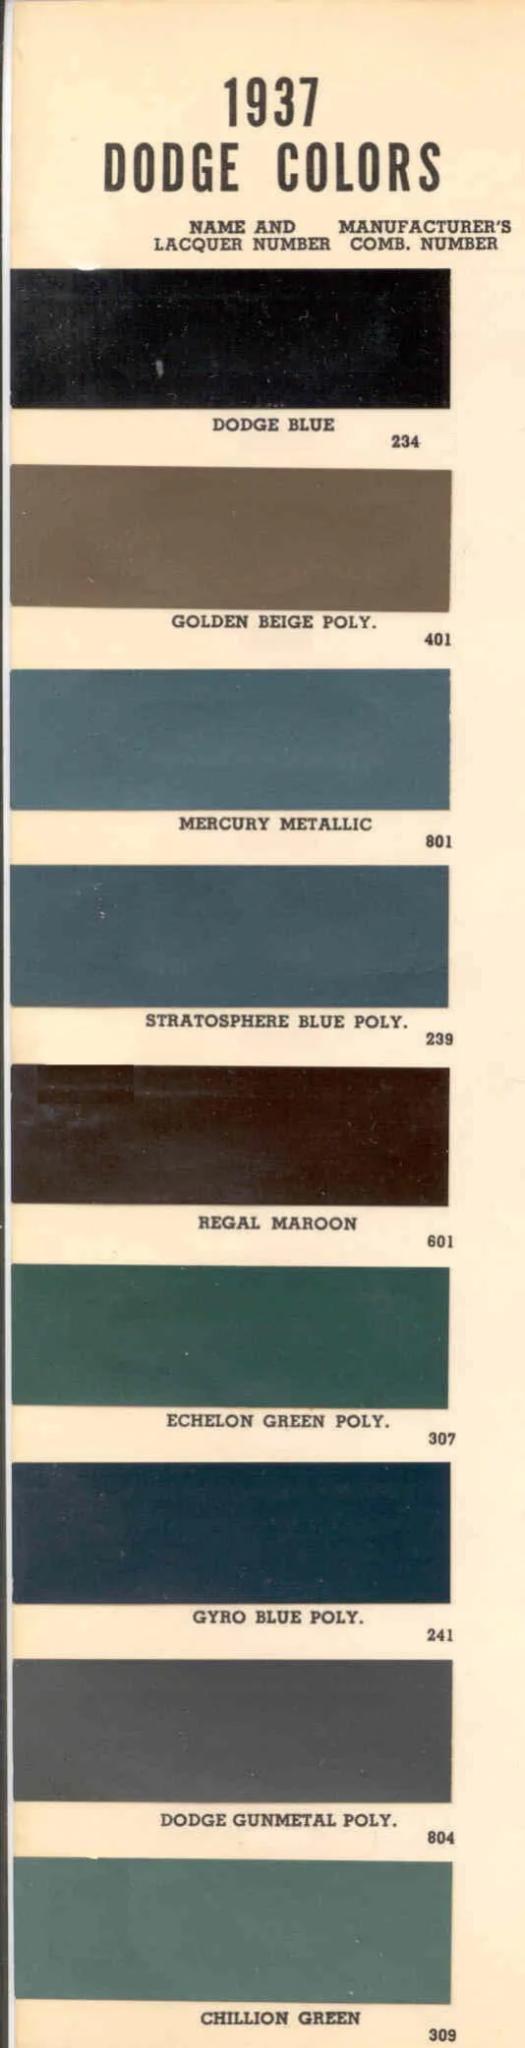 Summary Of Colors used on all Dodge Vehicles in 1937